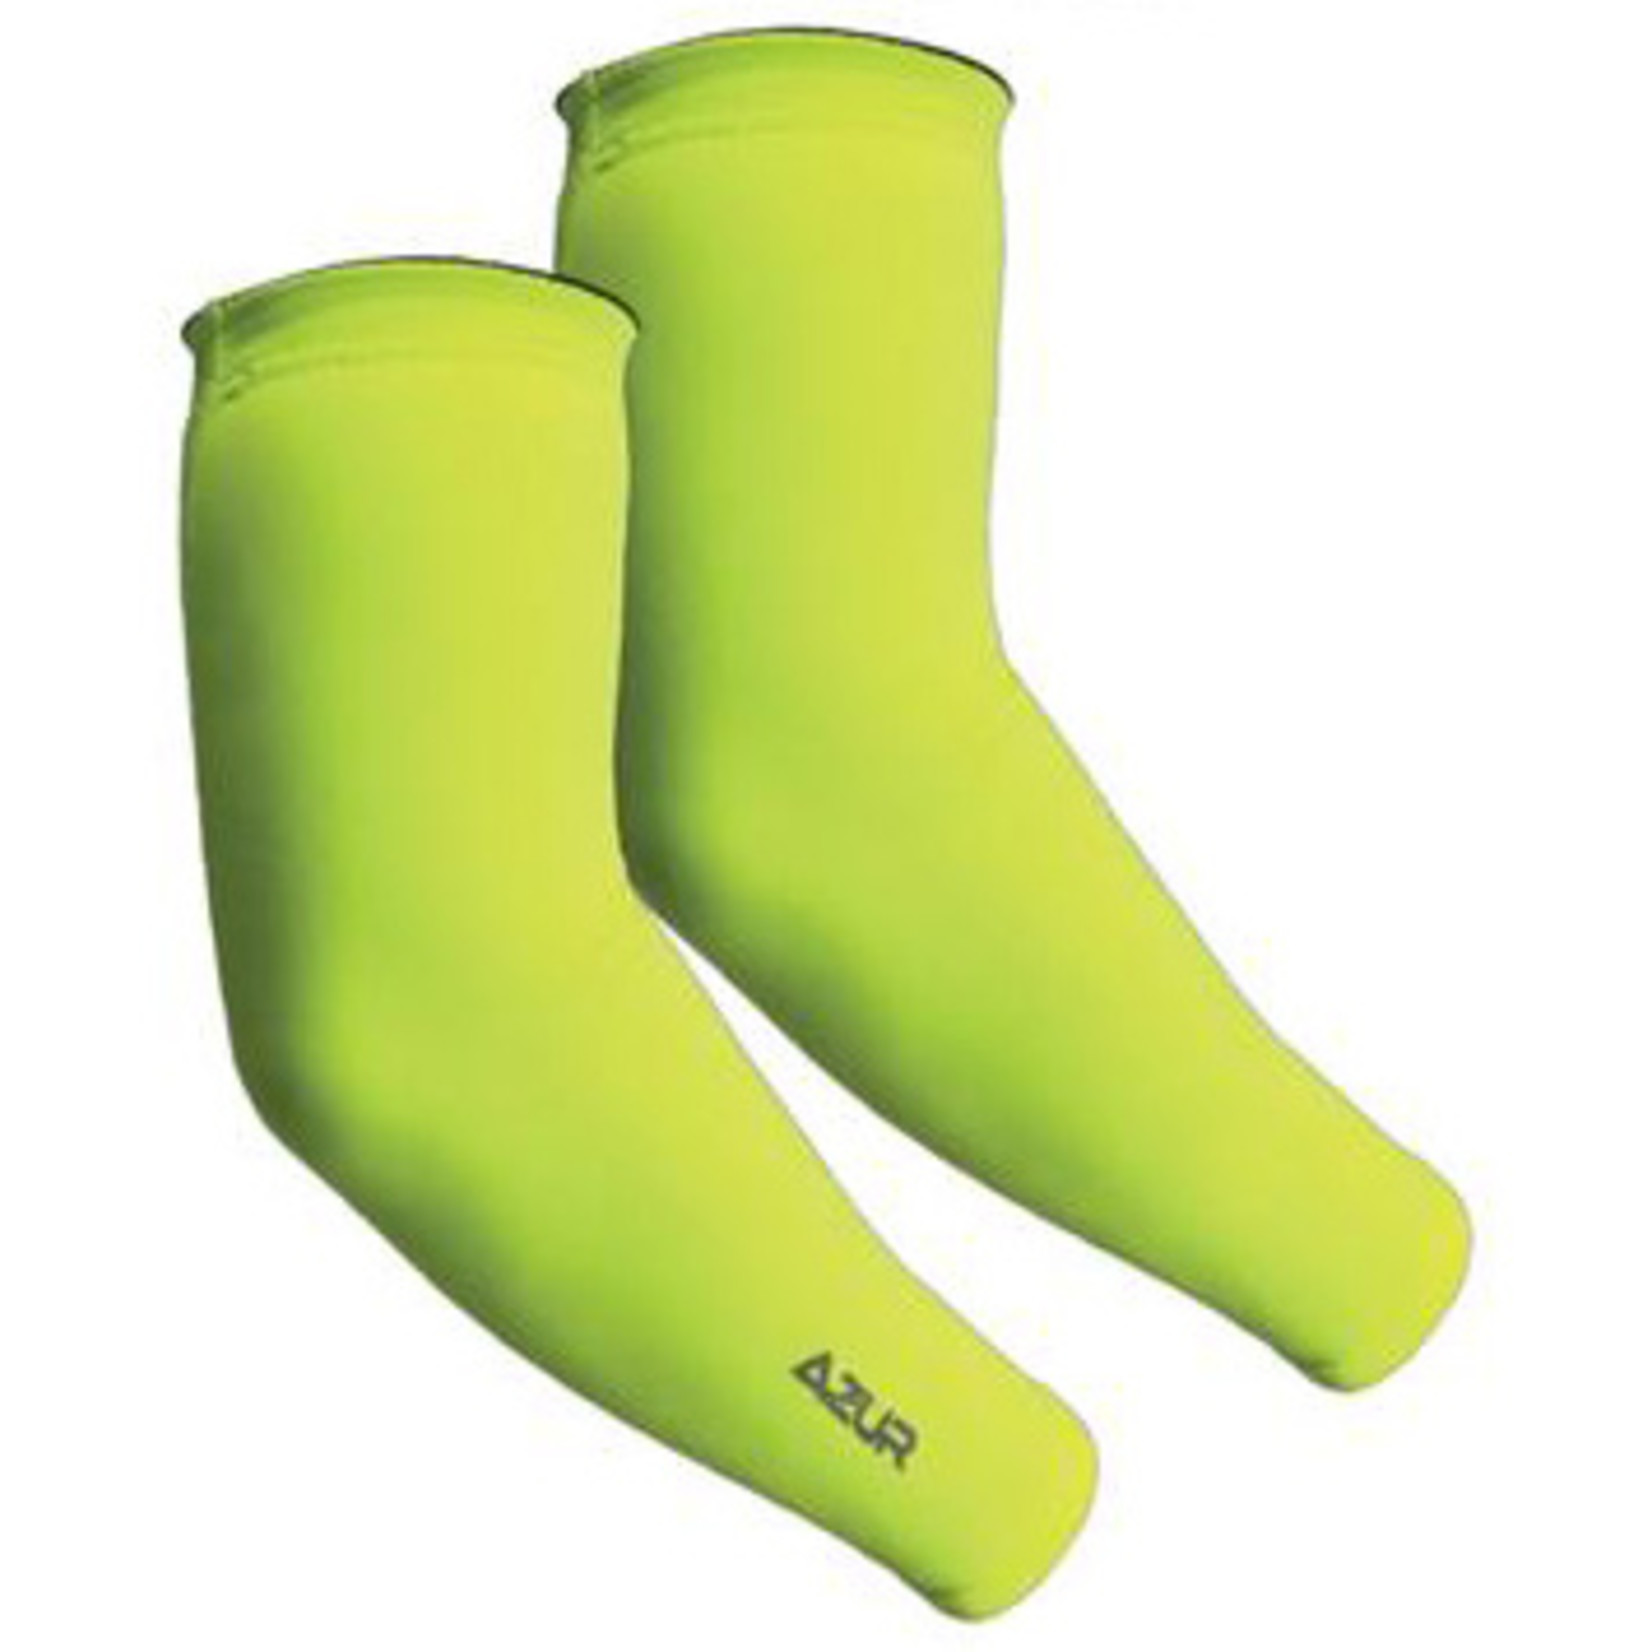 Azur Azur Bike/Cycling Arm Warmers Neon Styled To Fit Comfortably - X Large-"Special"